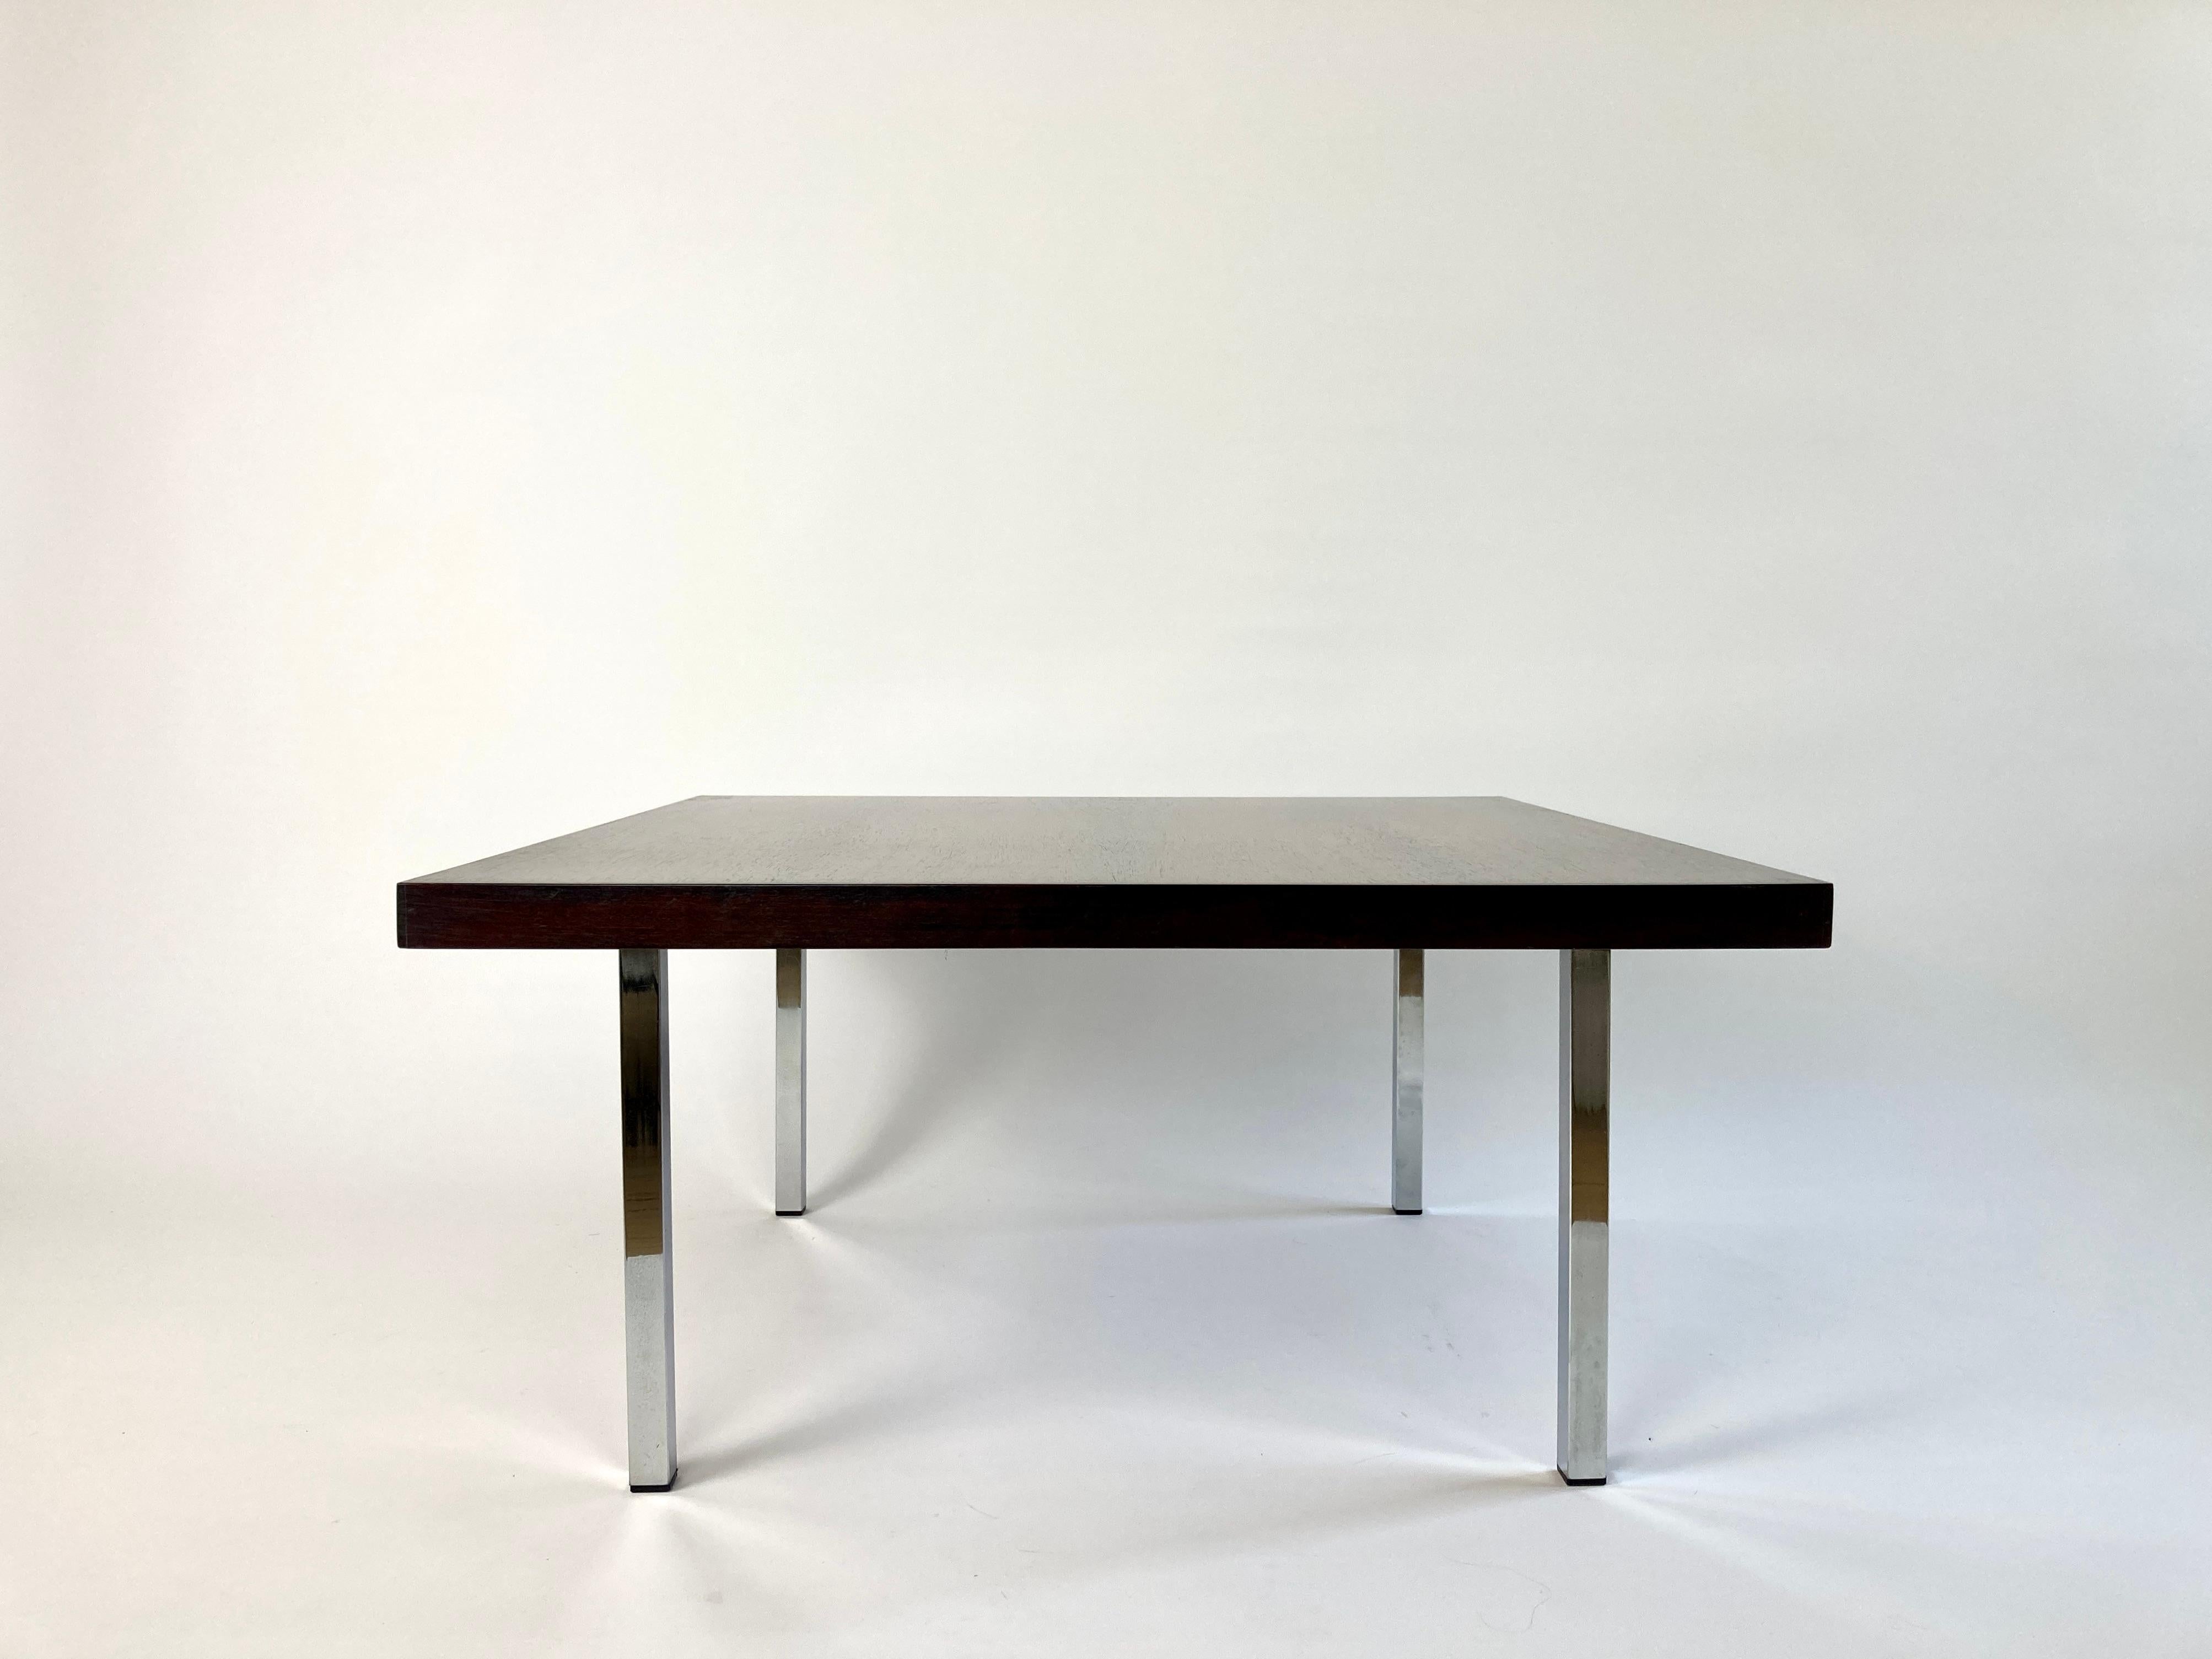 Square coffee table by Kho LIang Ie for Dutch furniture manufacturer Artifort, dating from the 1960s.

Rosewood top showing superb colour and grain sitting on chromed steel legs.

Excellent original condition, no old repairs, just one tiny dint